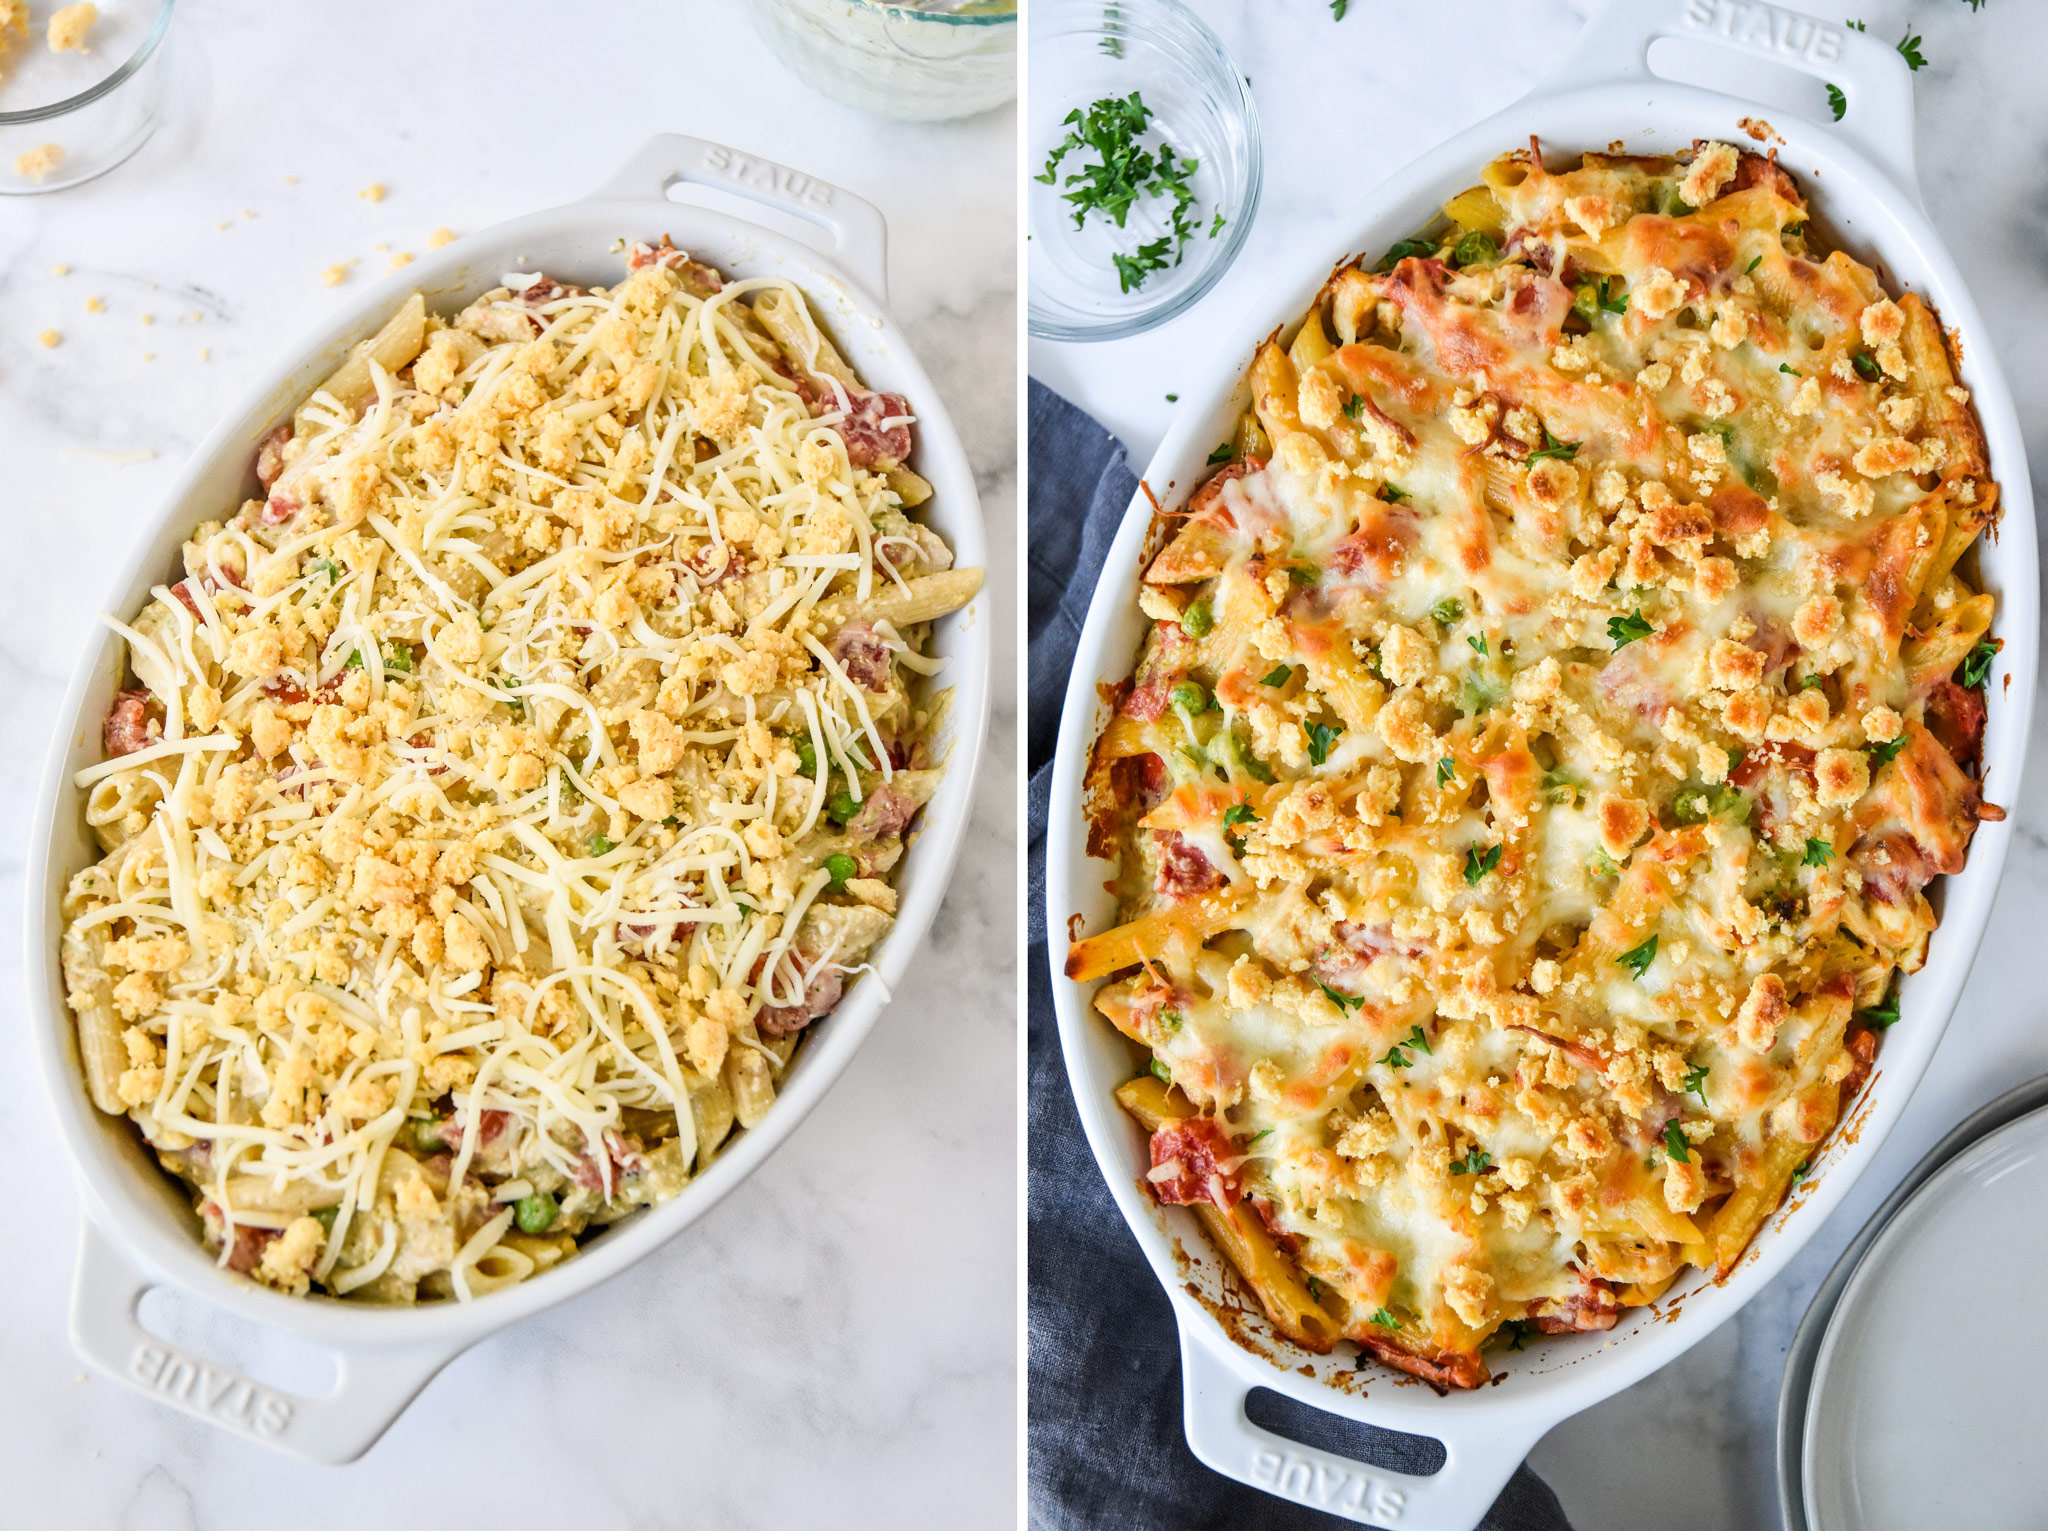 before and after baking the creamy pesto pasta chicken bake dish.